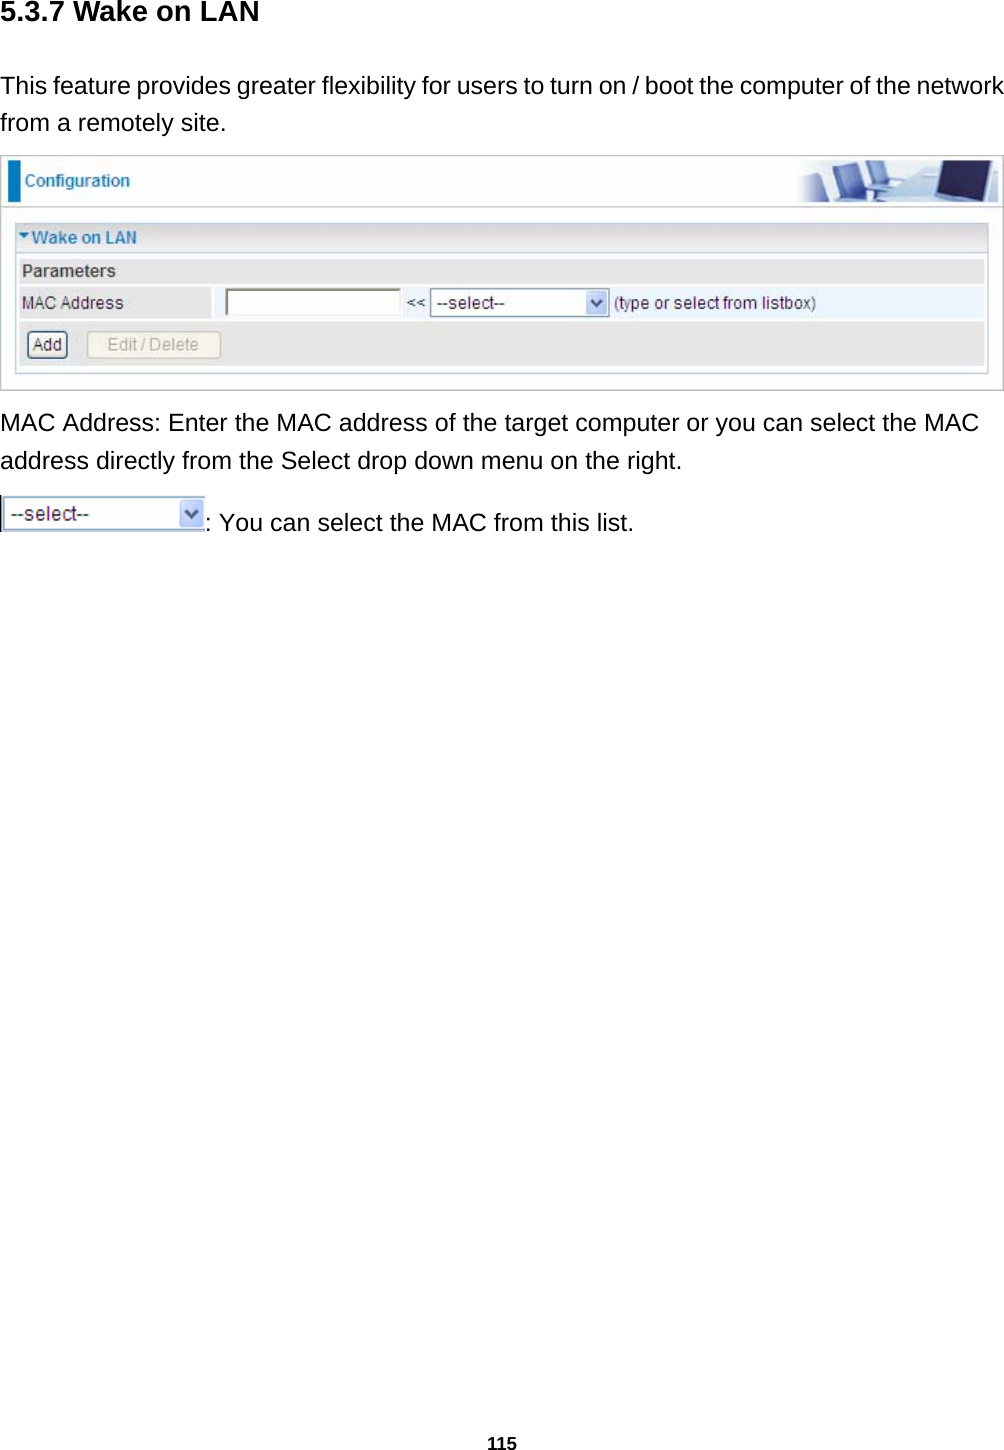 115 5.3.7 Wake on LAN This feature provides greater flexibility for users to turn on / boot the computer of the network from a remotely site.  MAC Address: Enter the MAC address of the target computer or you can select the MAC address directly from the Select drop down menu on the right. : You can select the MAC from this list. 